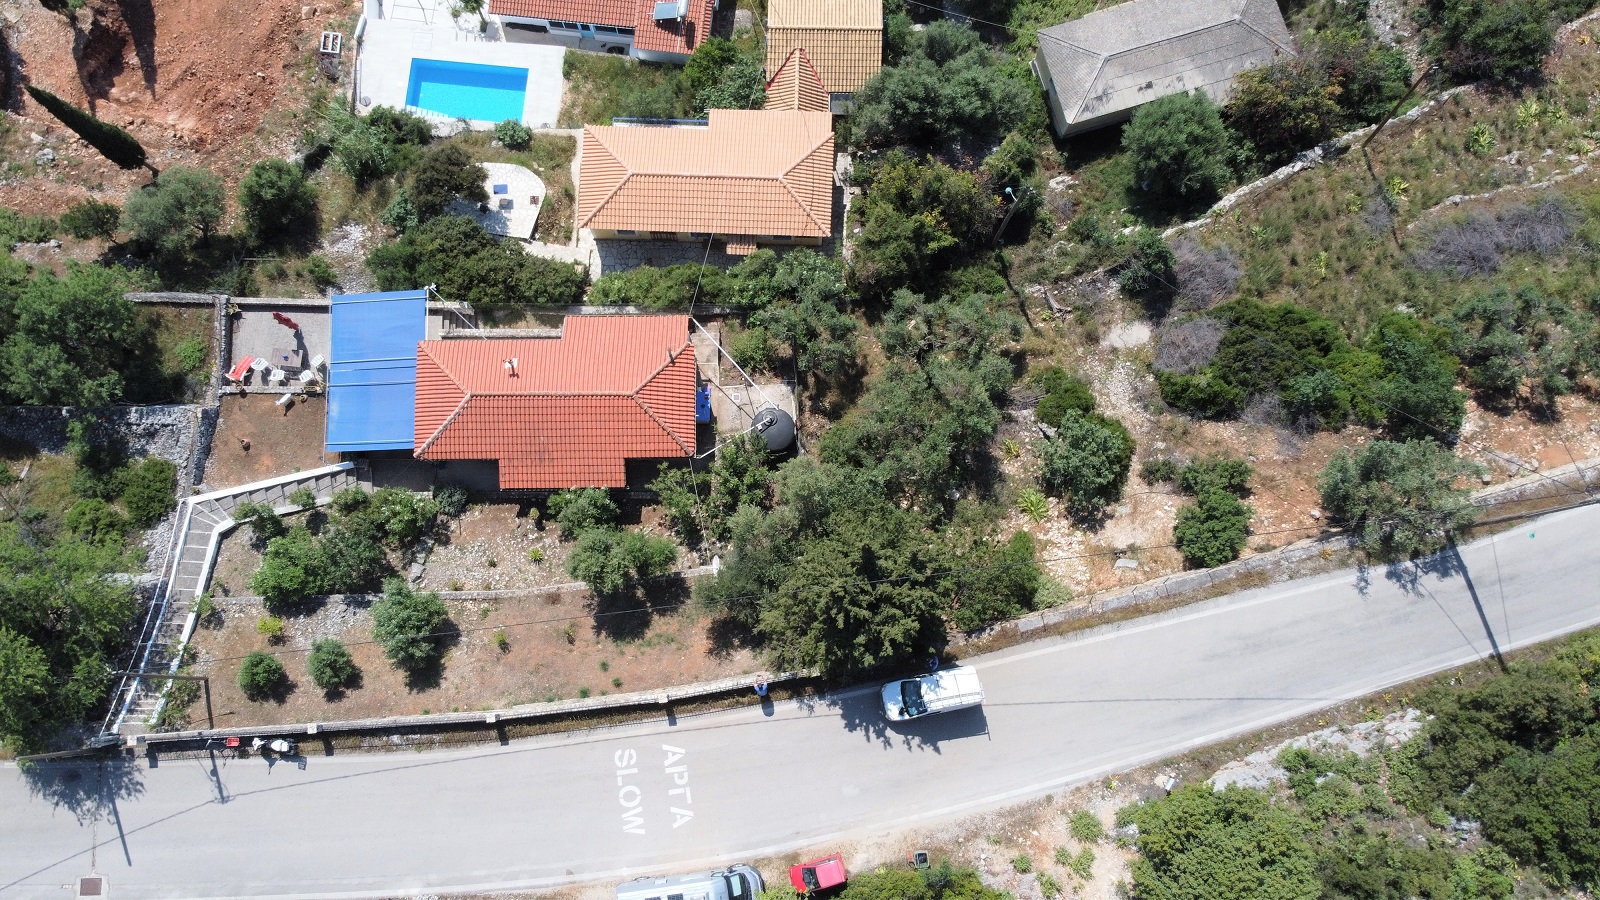 Aerial views of house for sale on Ithaca Greece, Lefki